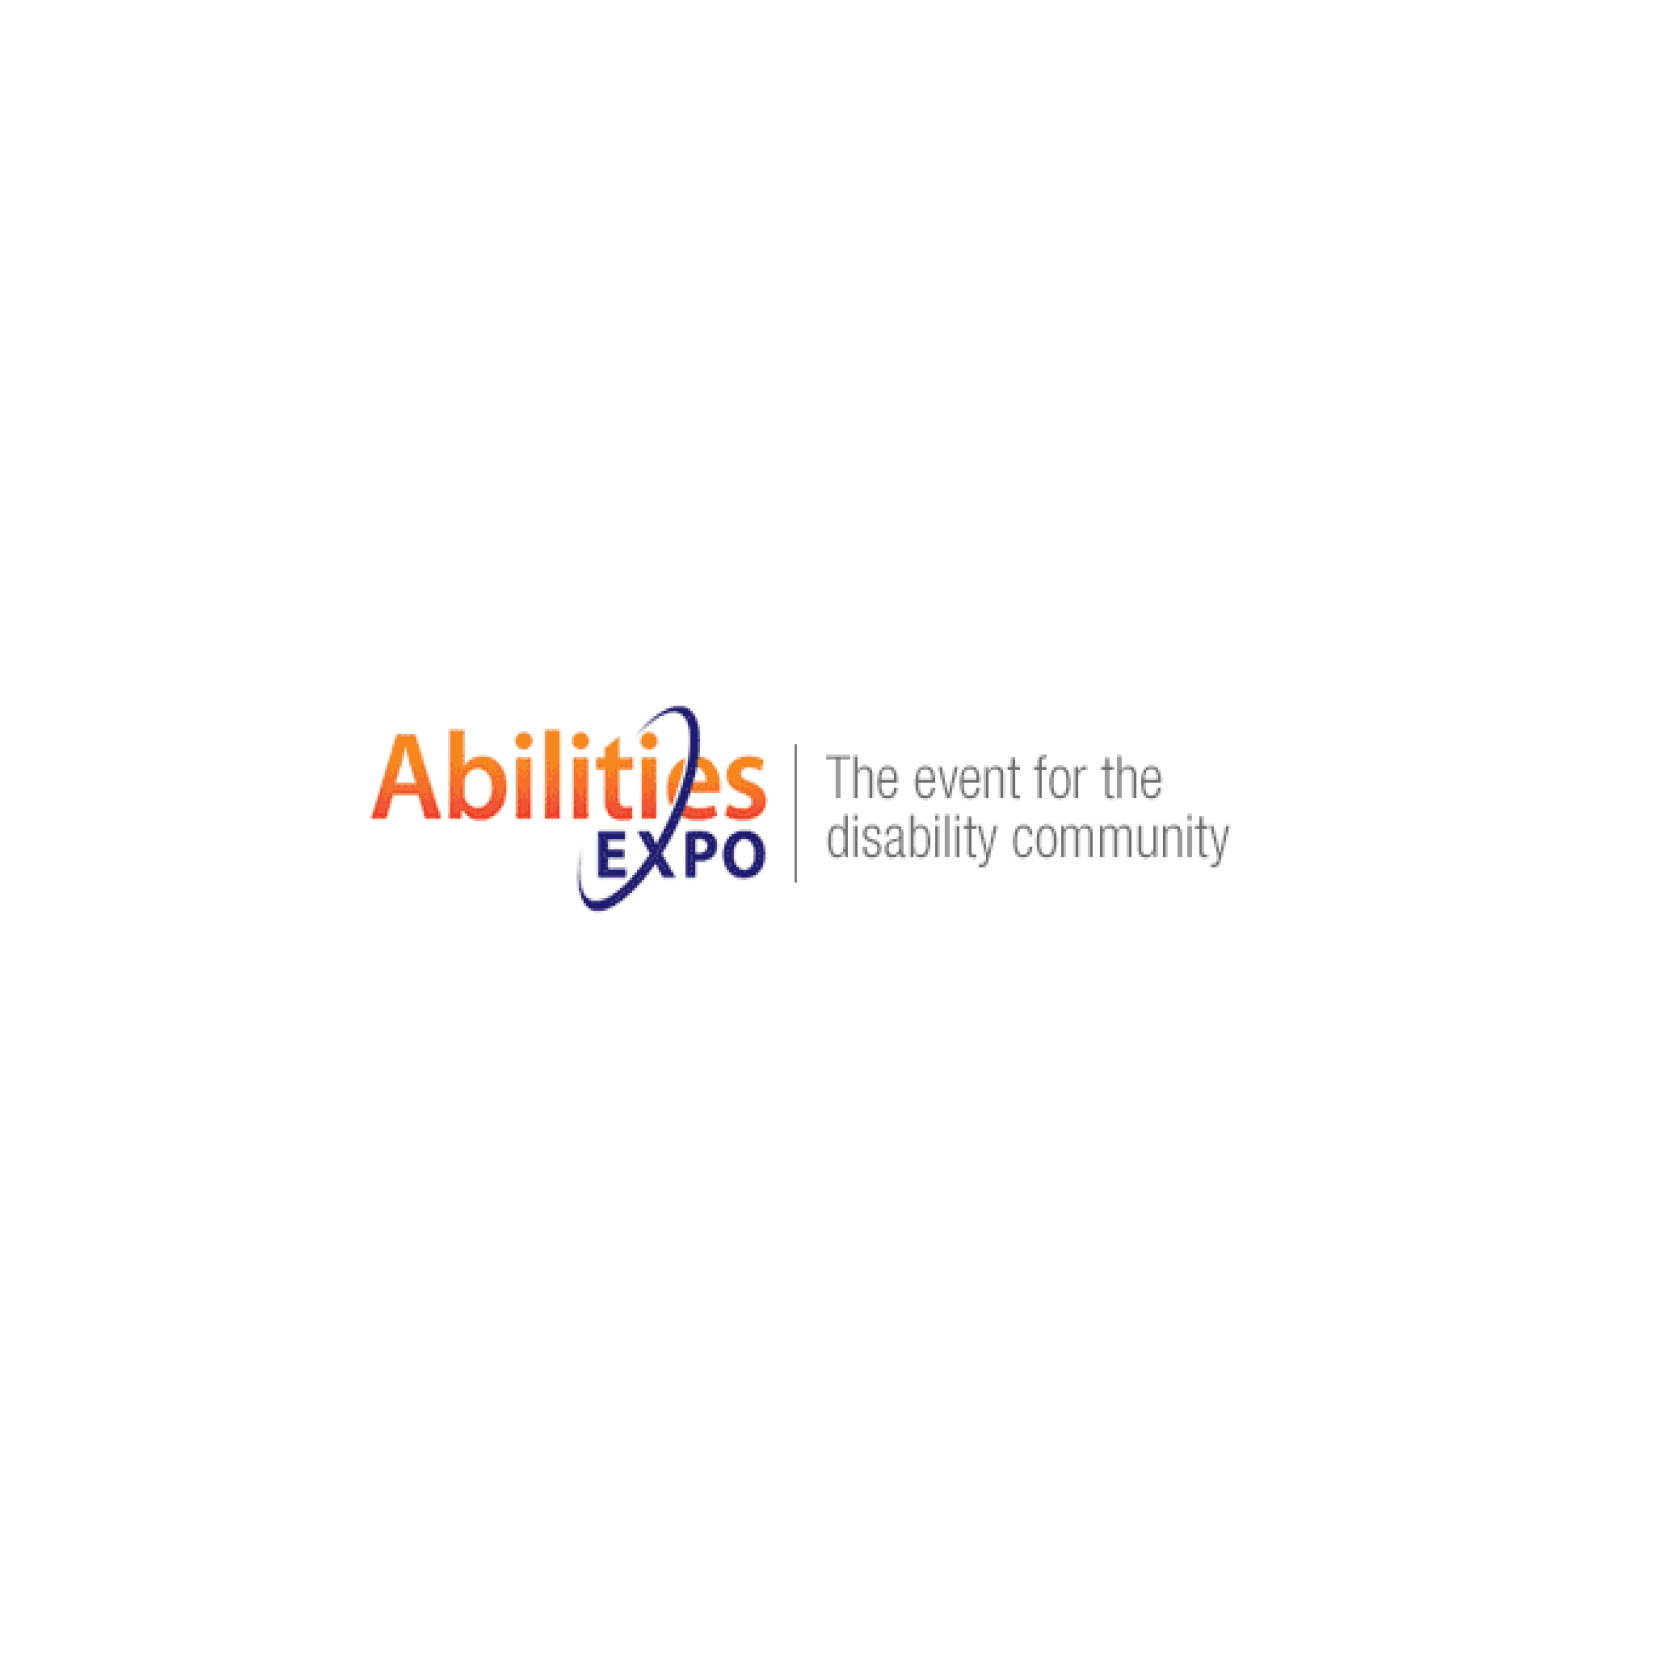 Abilities Expo Los Angeles Convention Center